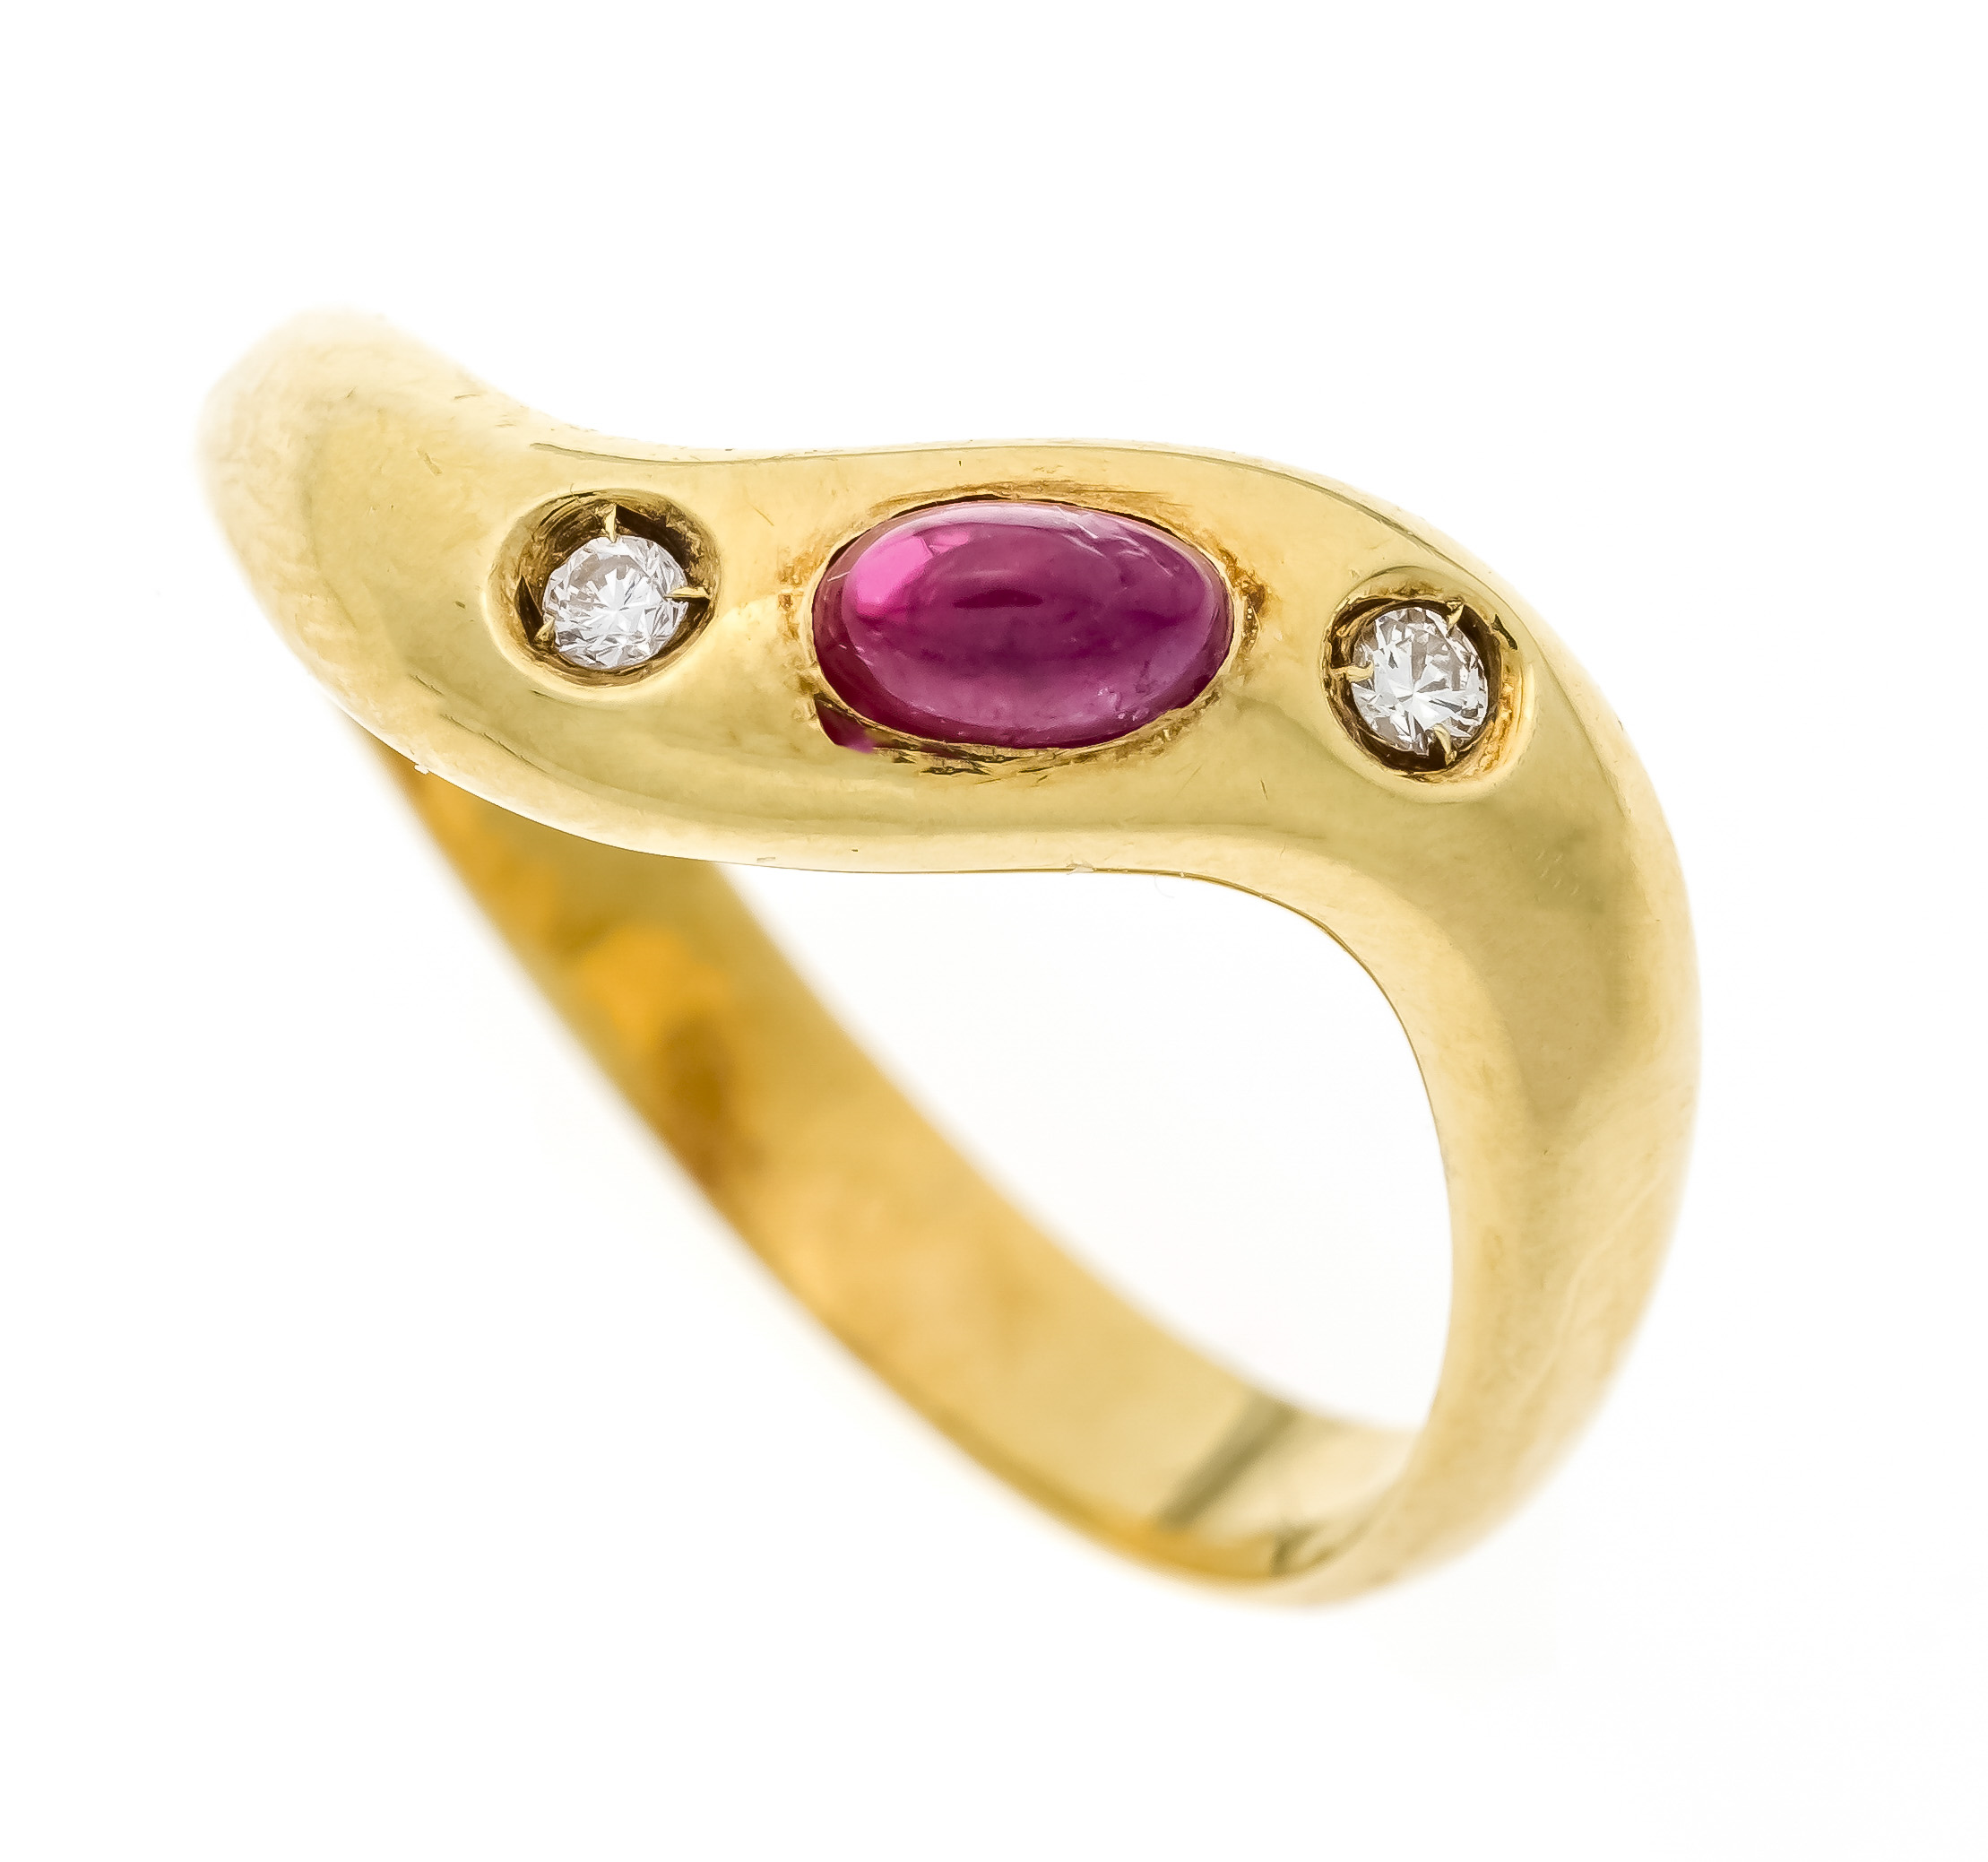 Ruby-brilliant ring GG 750/000 with an oval ruby cabochon 4.7 x 2.8 mm and 2 brilliant-cut diamonds,